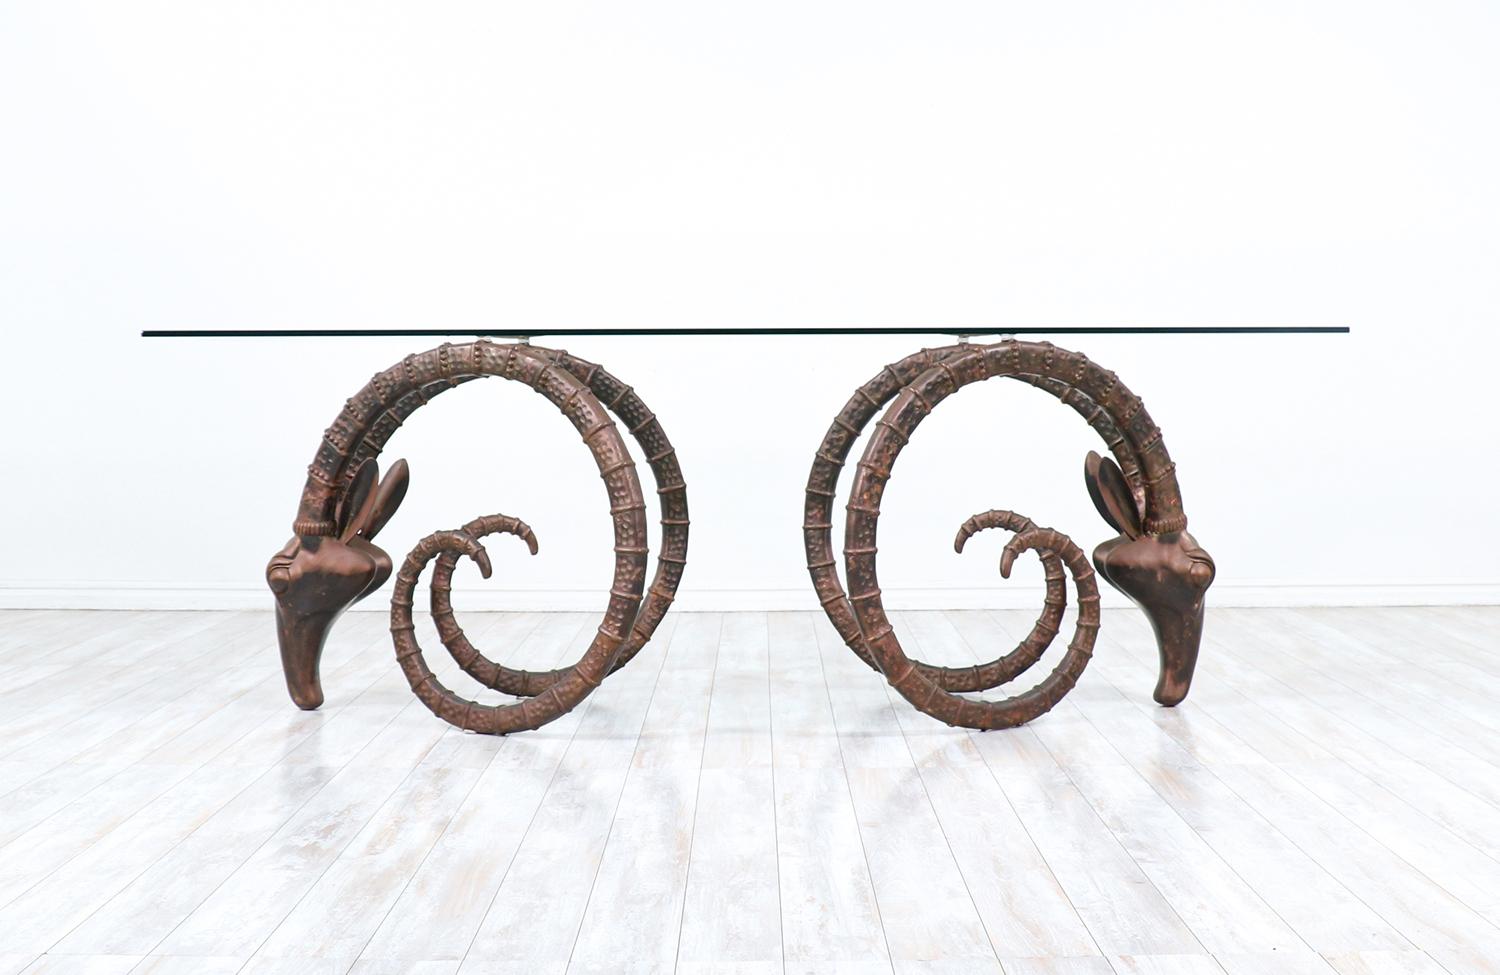 Mid-Century Modern bronze rams head Ibex dining table.

________________________________________

Transforming a piece of Mid-Century Modern furniture is like bringing history back to life, and we take this journey with passion and precision. With